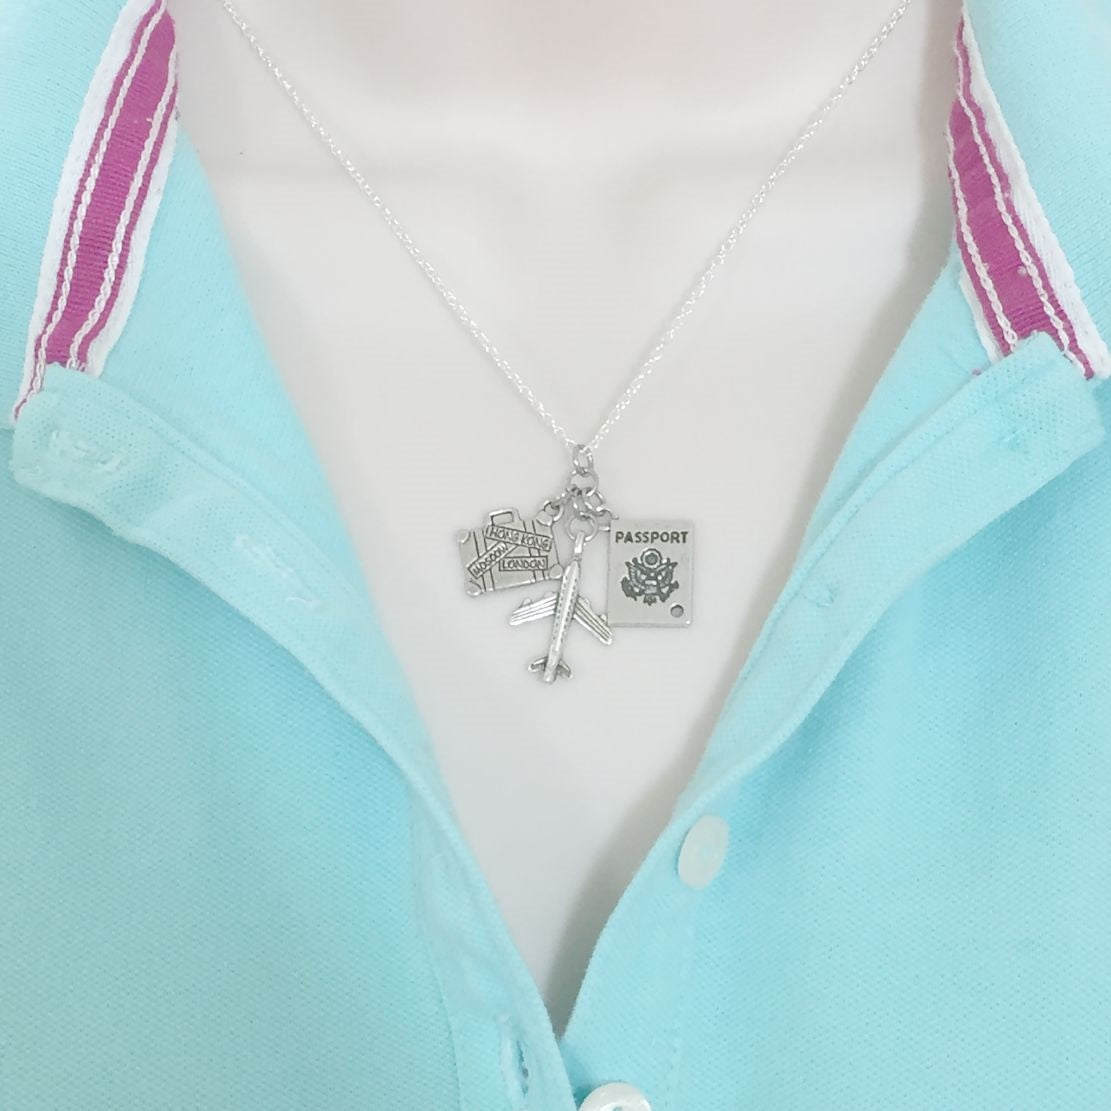 Travel Cluster Charm Silver Necklace.